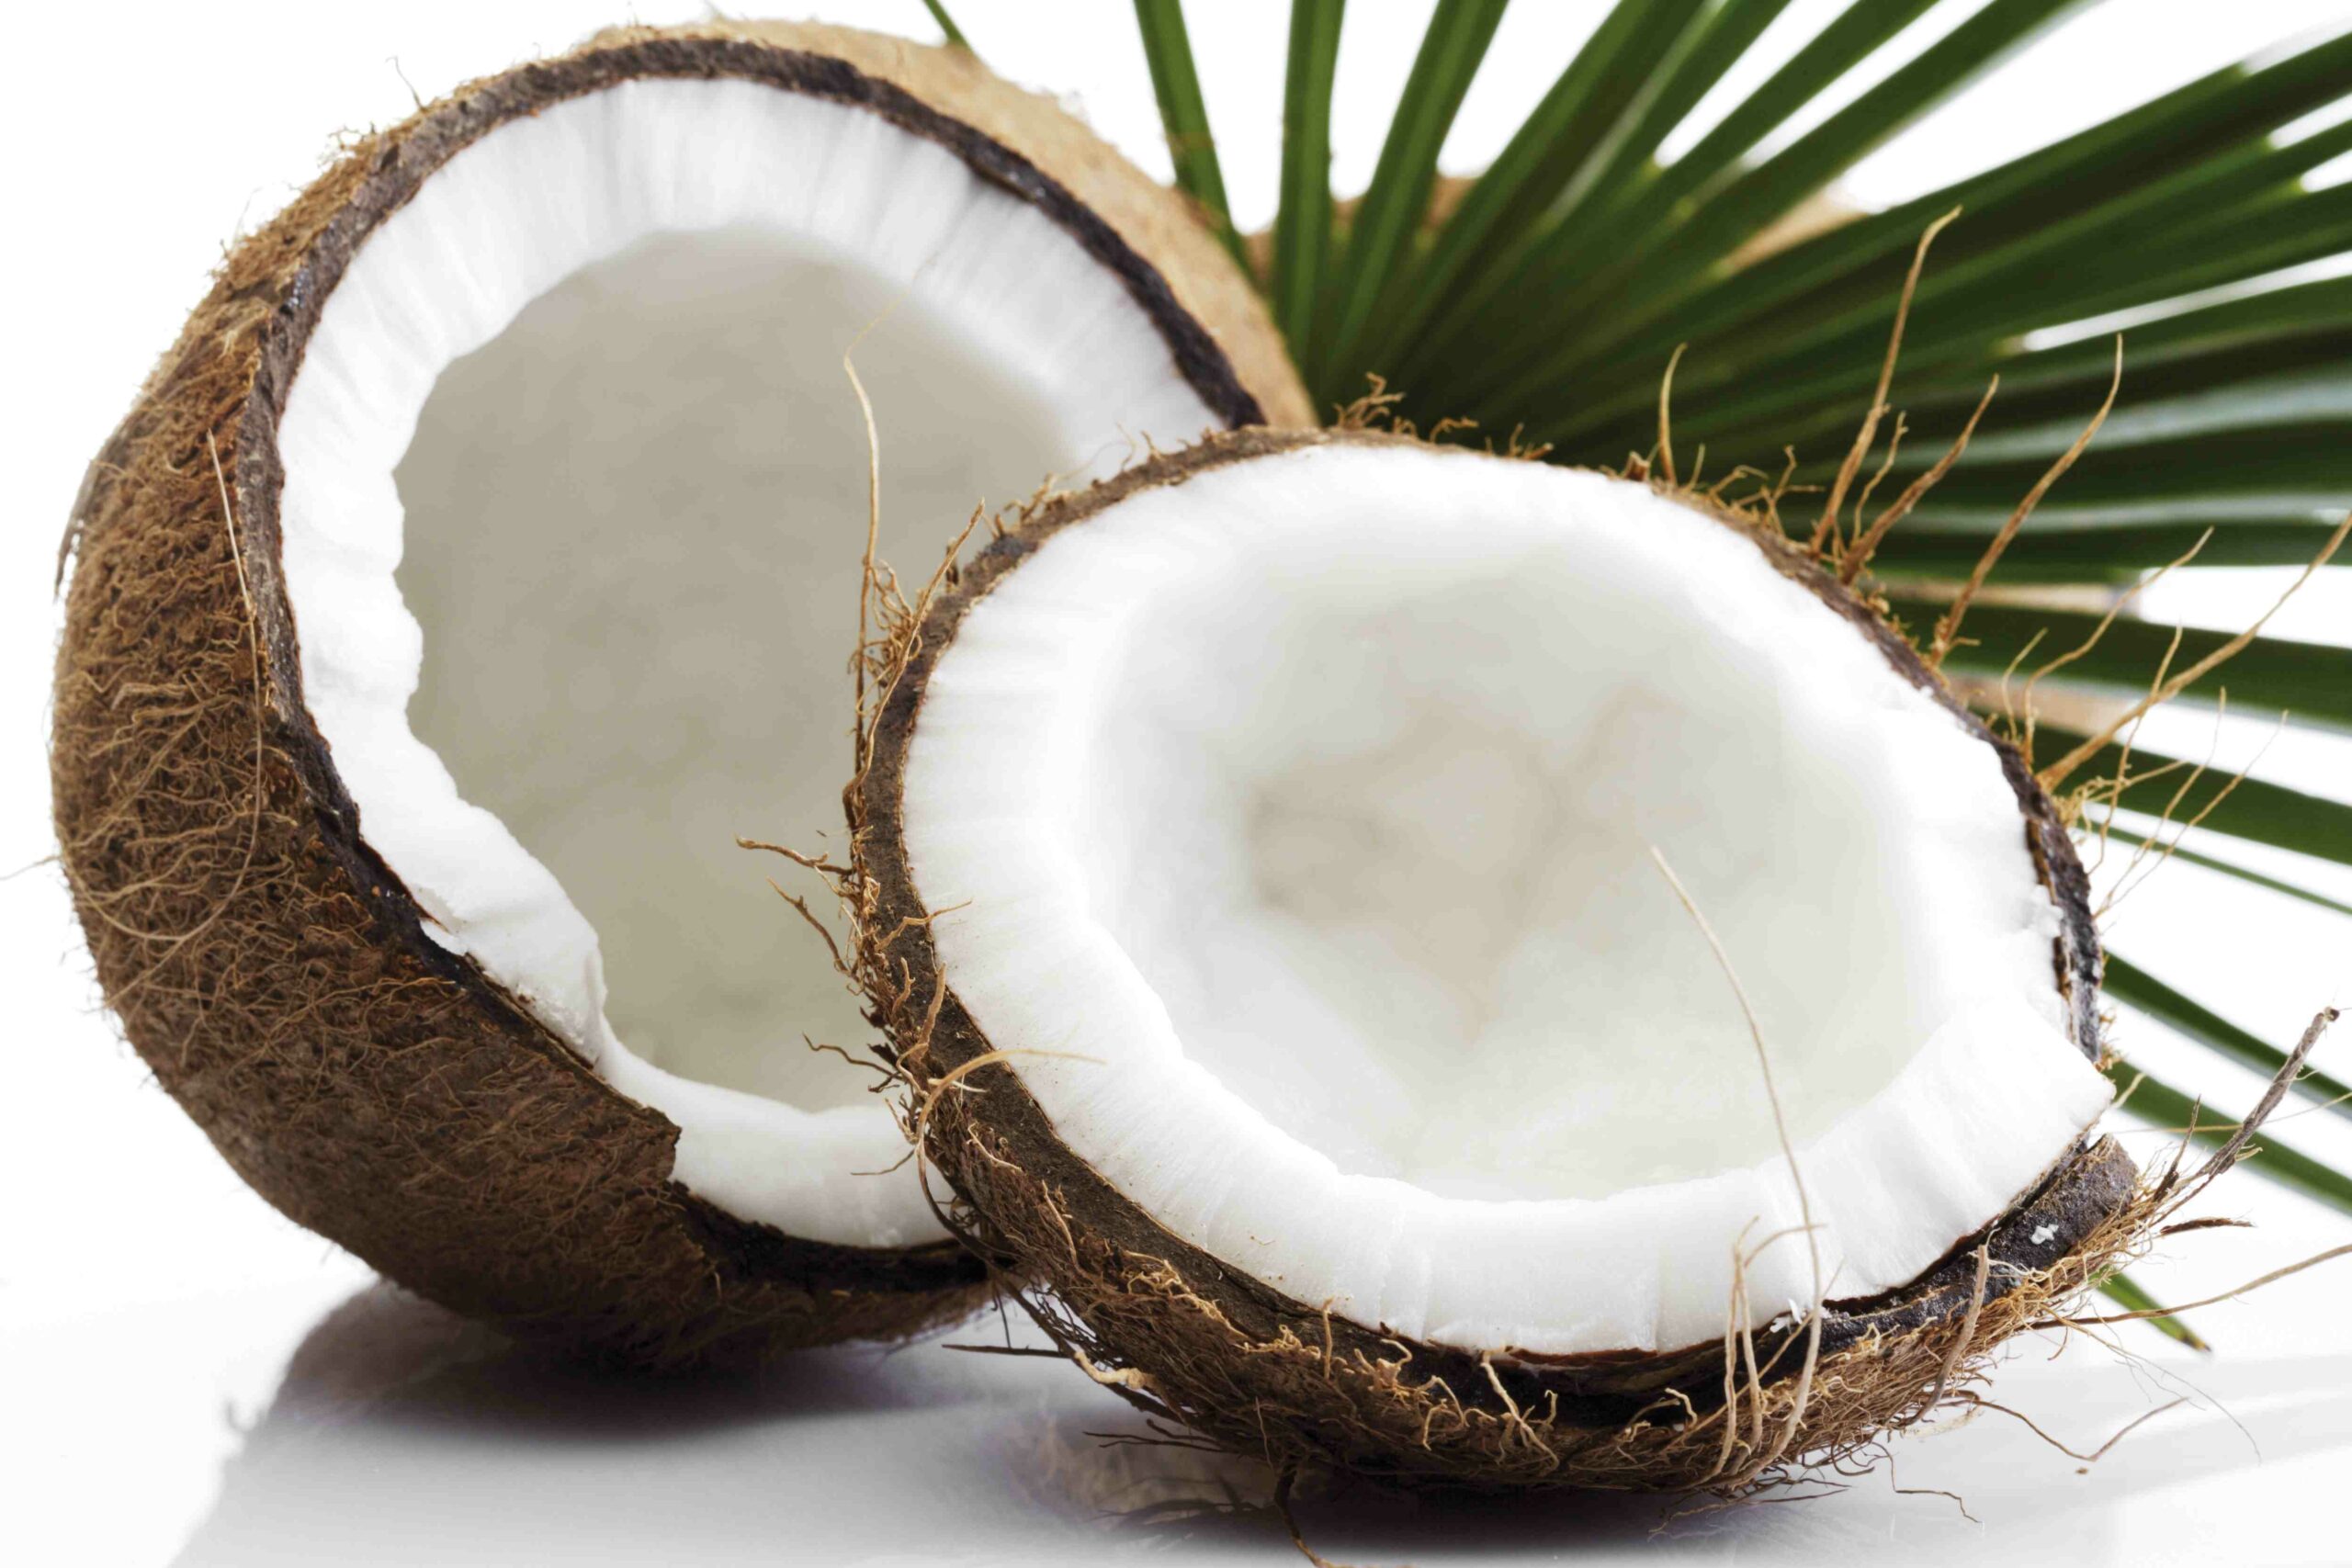 Can eating raw coconut make you sick?